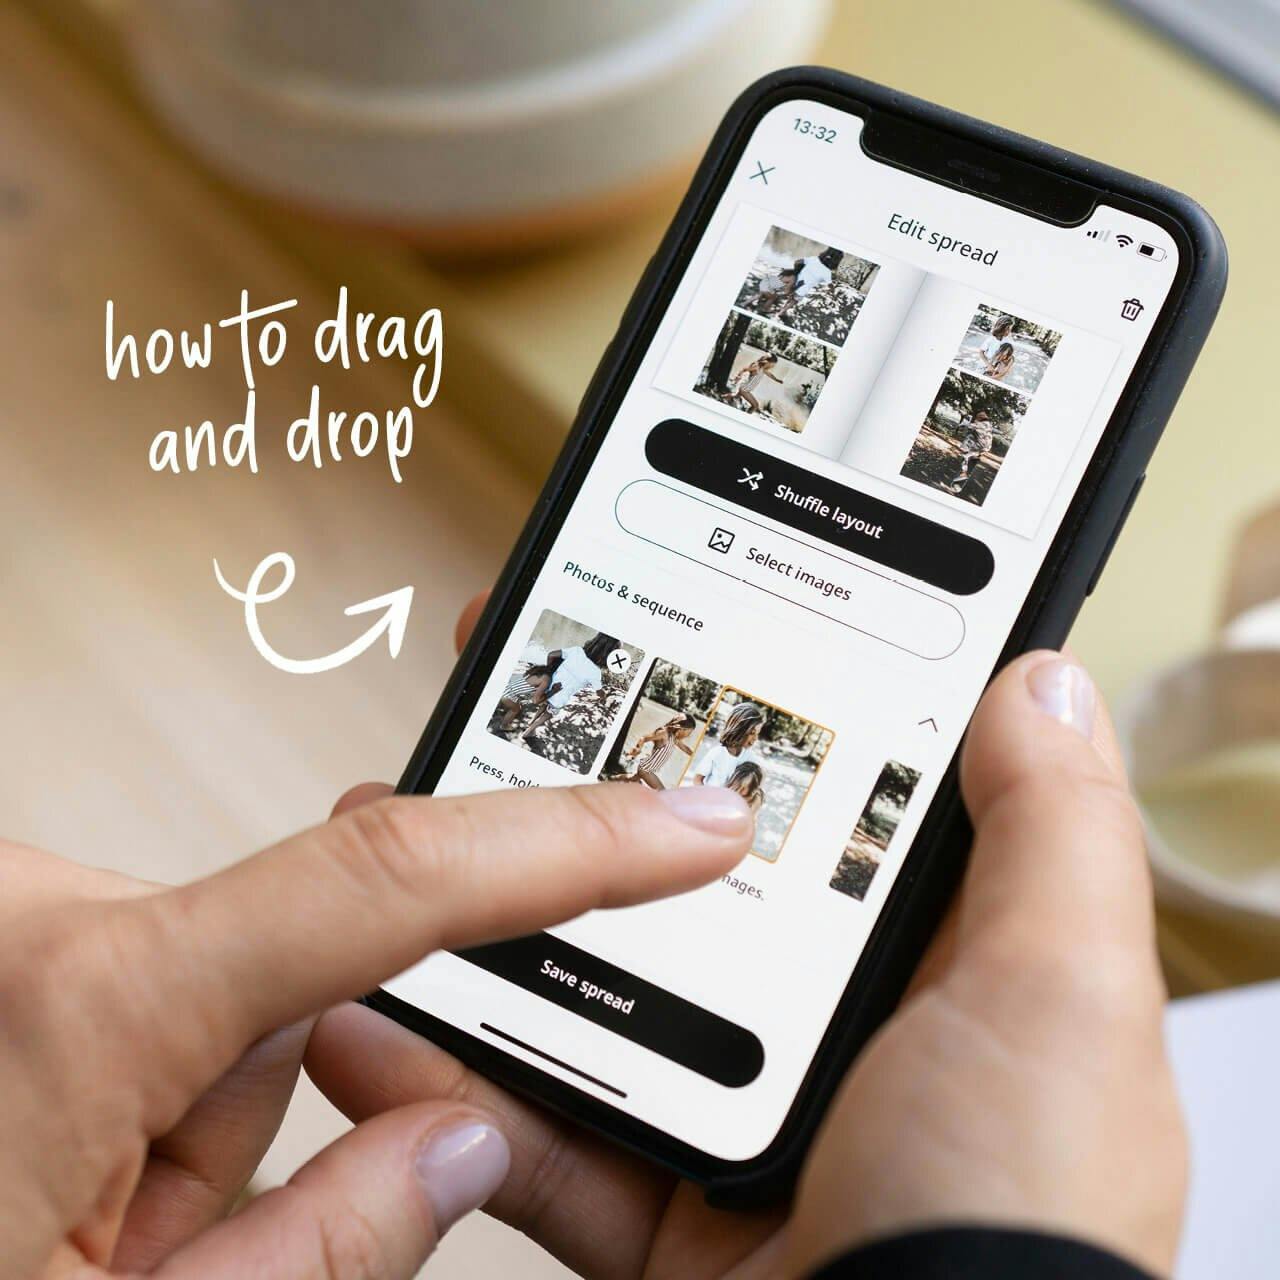 How-to: Drag-and-drop image